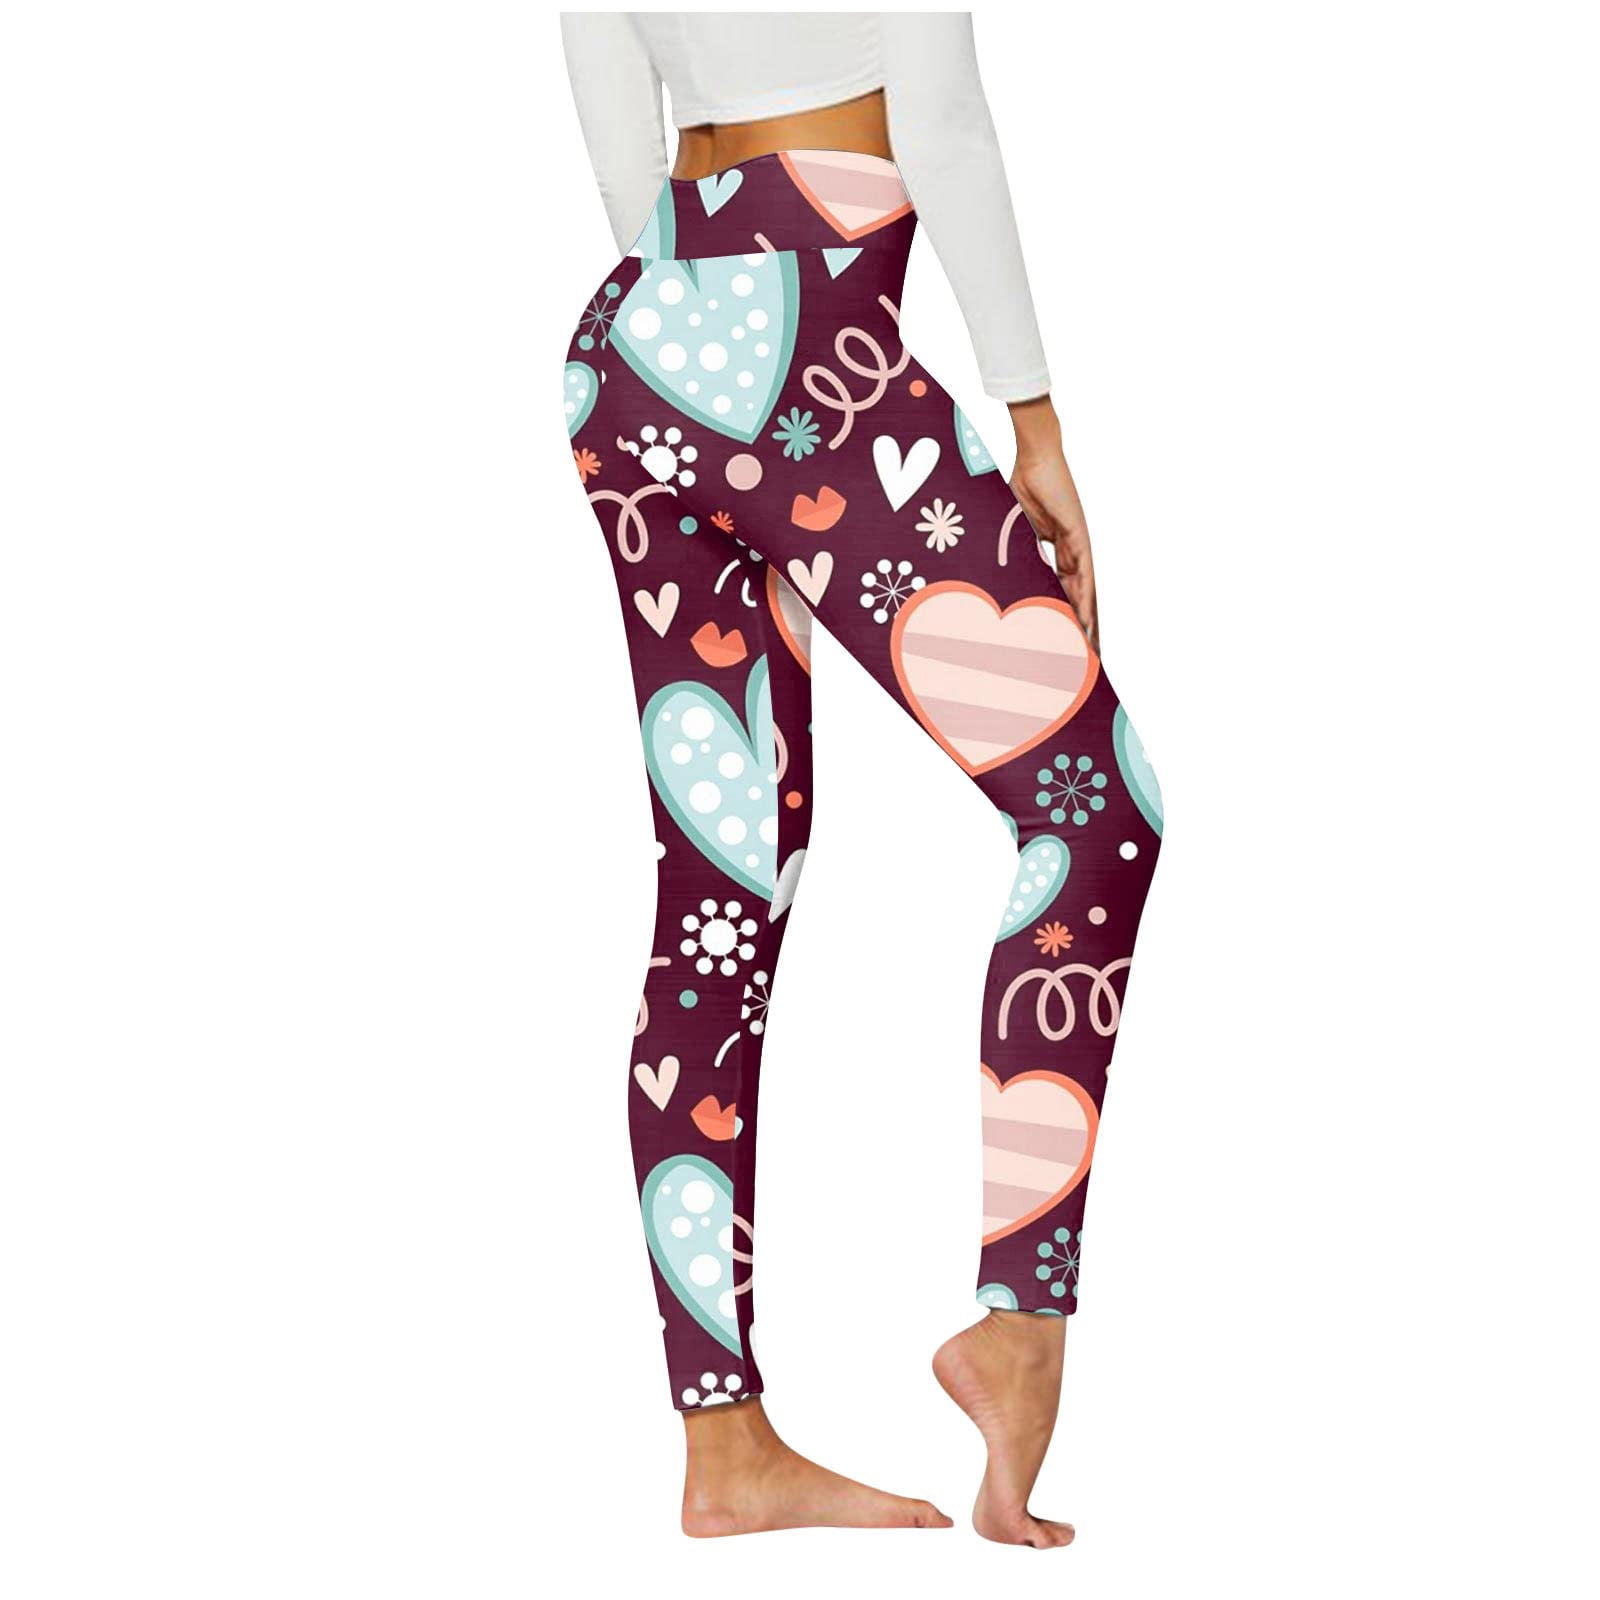 Zyia Jogger and Pant Guide  Joggers, Blue floral sweatshirt